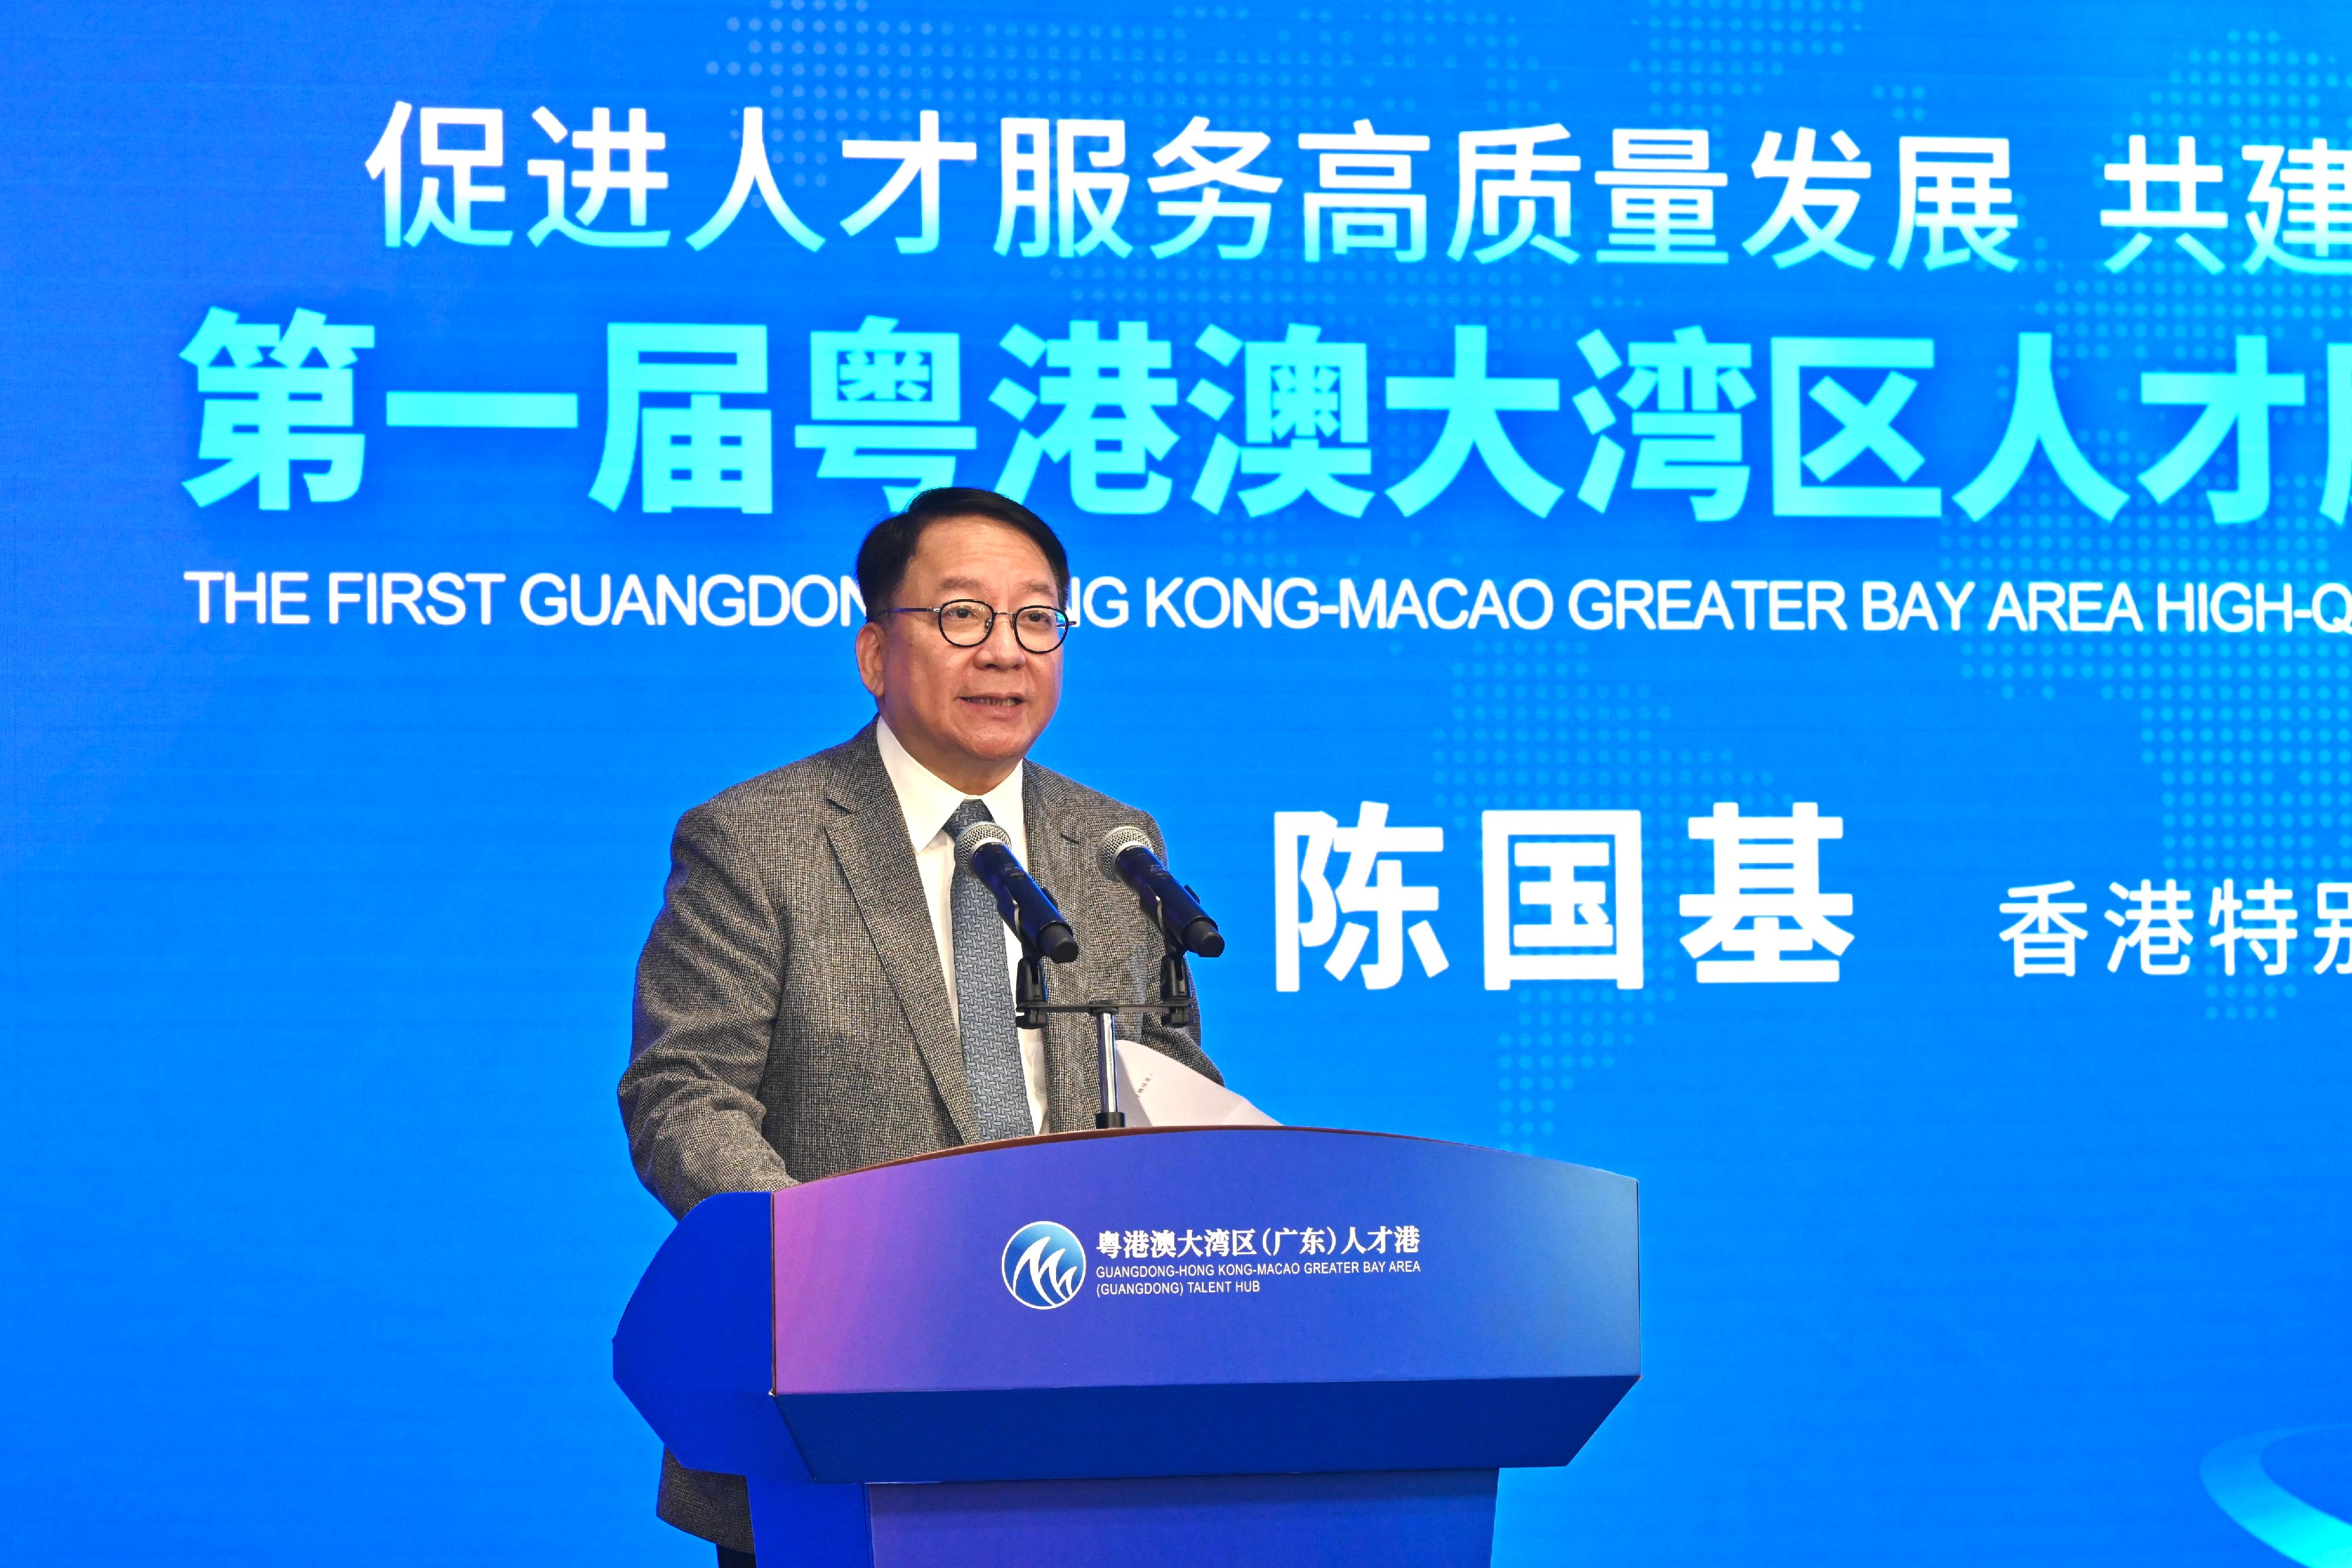 The Chief Secretary for Administration, Mr Chan Kwok-ki, speaks at the first Guangdong-Hong Kong-Macao Greater Bay Area High-quality Development Conference of Talent Service in Guangzhou today (February 20).